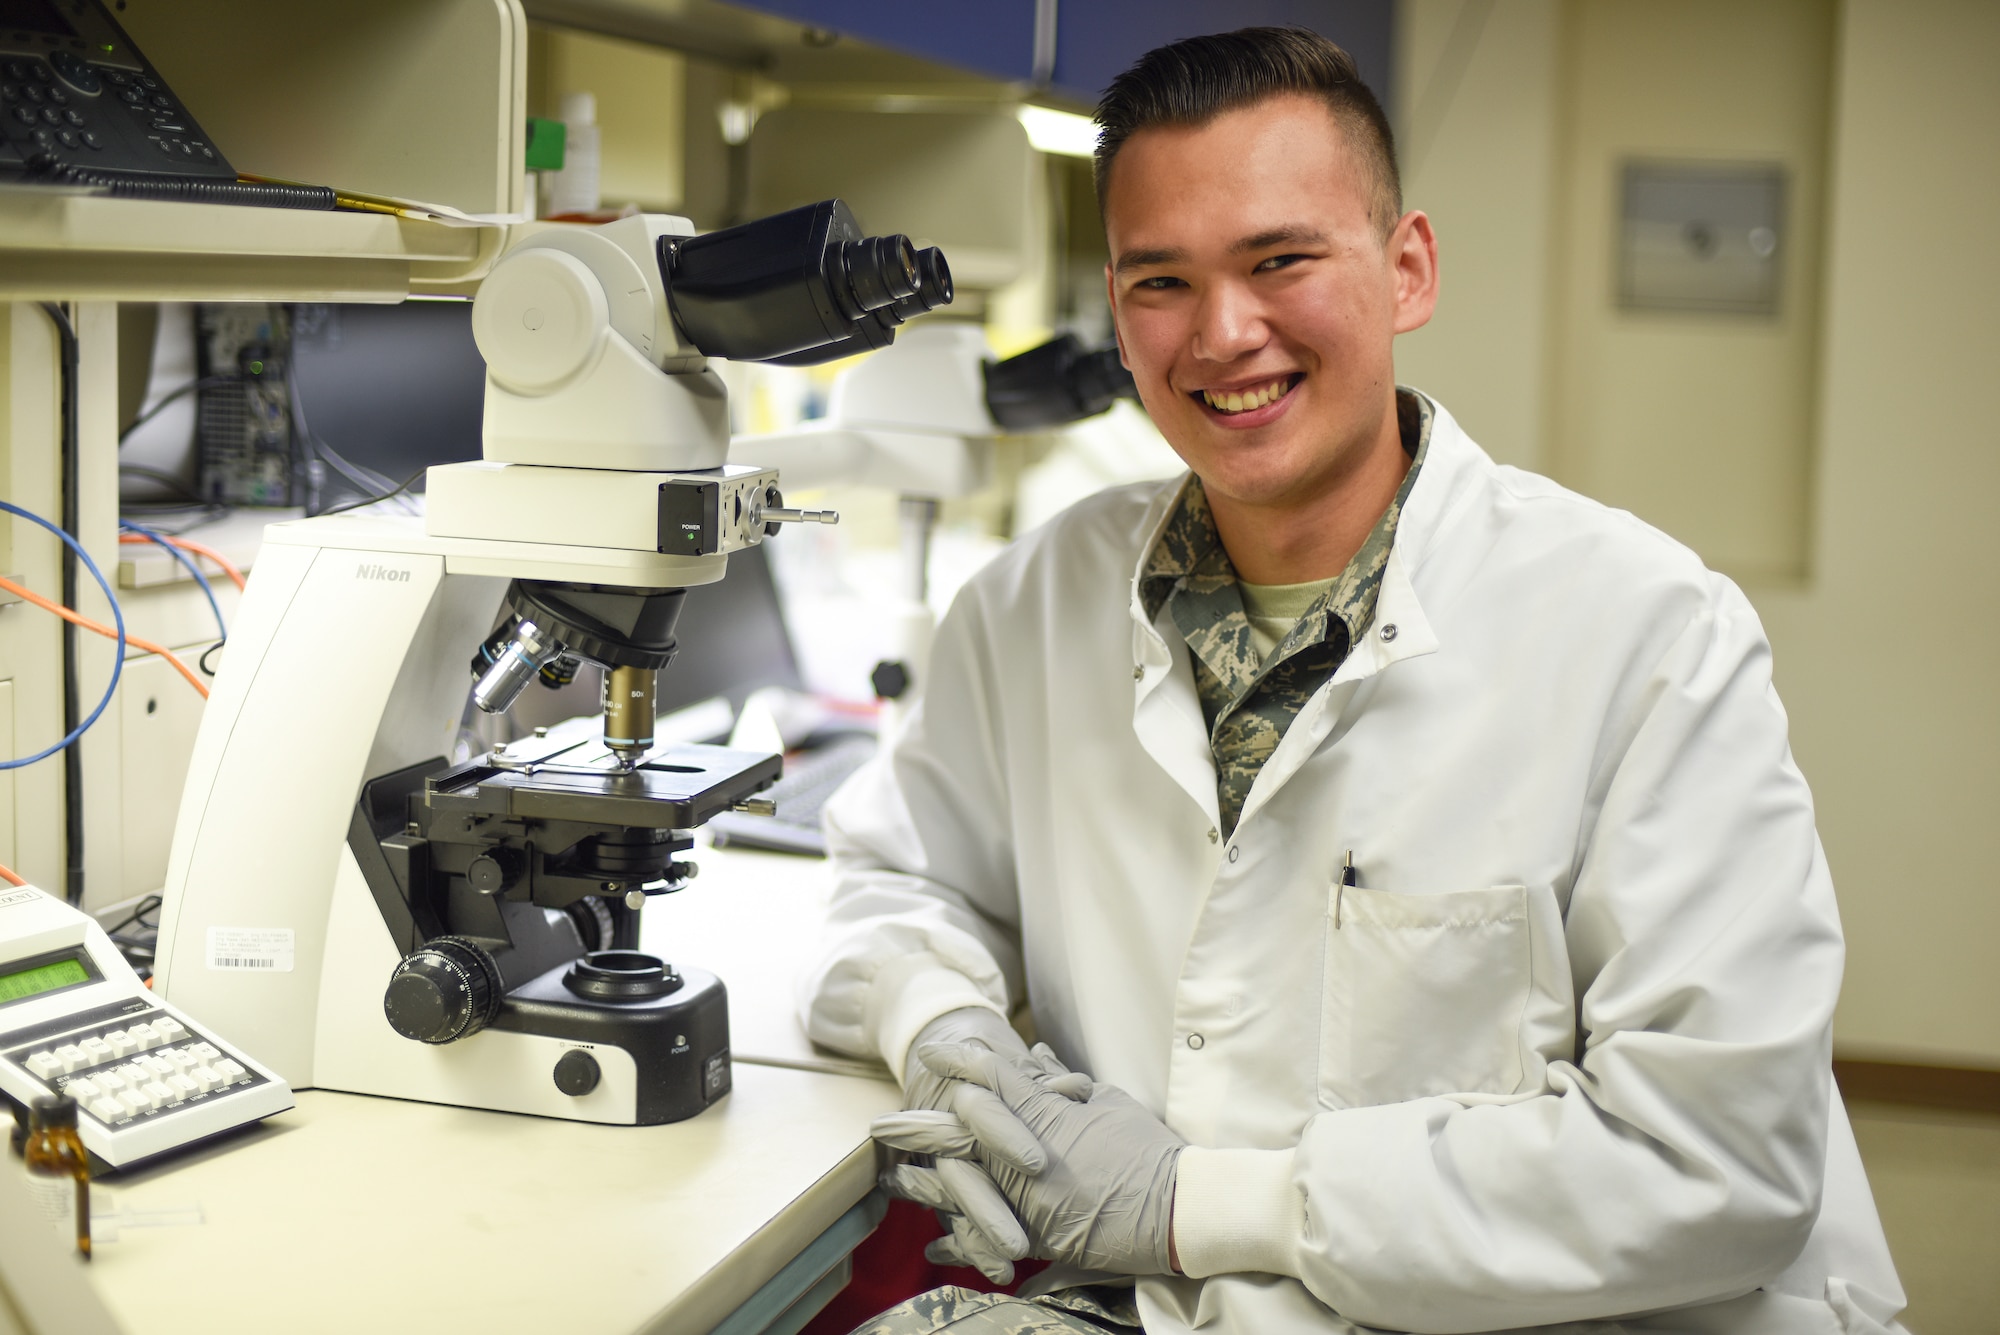 Senior Airman Philip Fisketjon, 341st Medical Group medical laboratory technician, poses for a picture August 13, 2019, at the laboratory on Malmstrom Air Force Base, Mont.